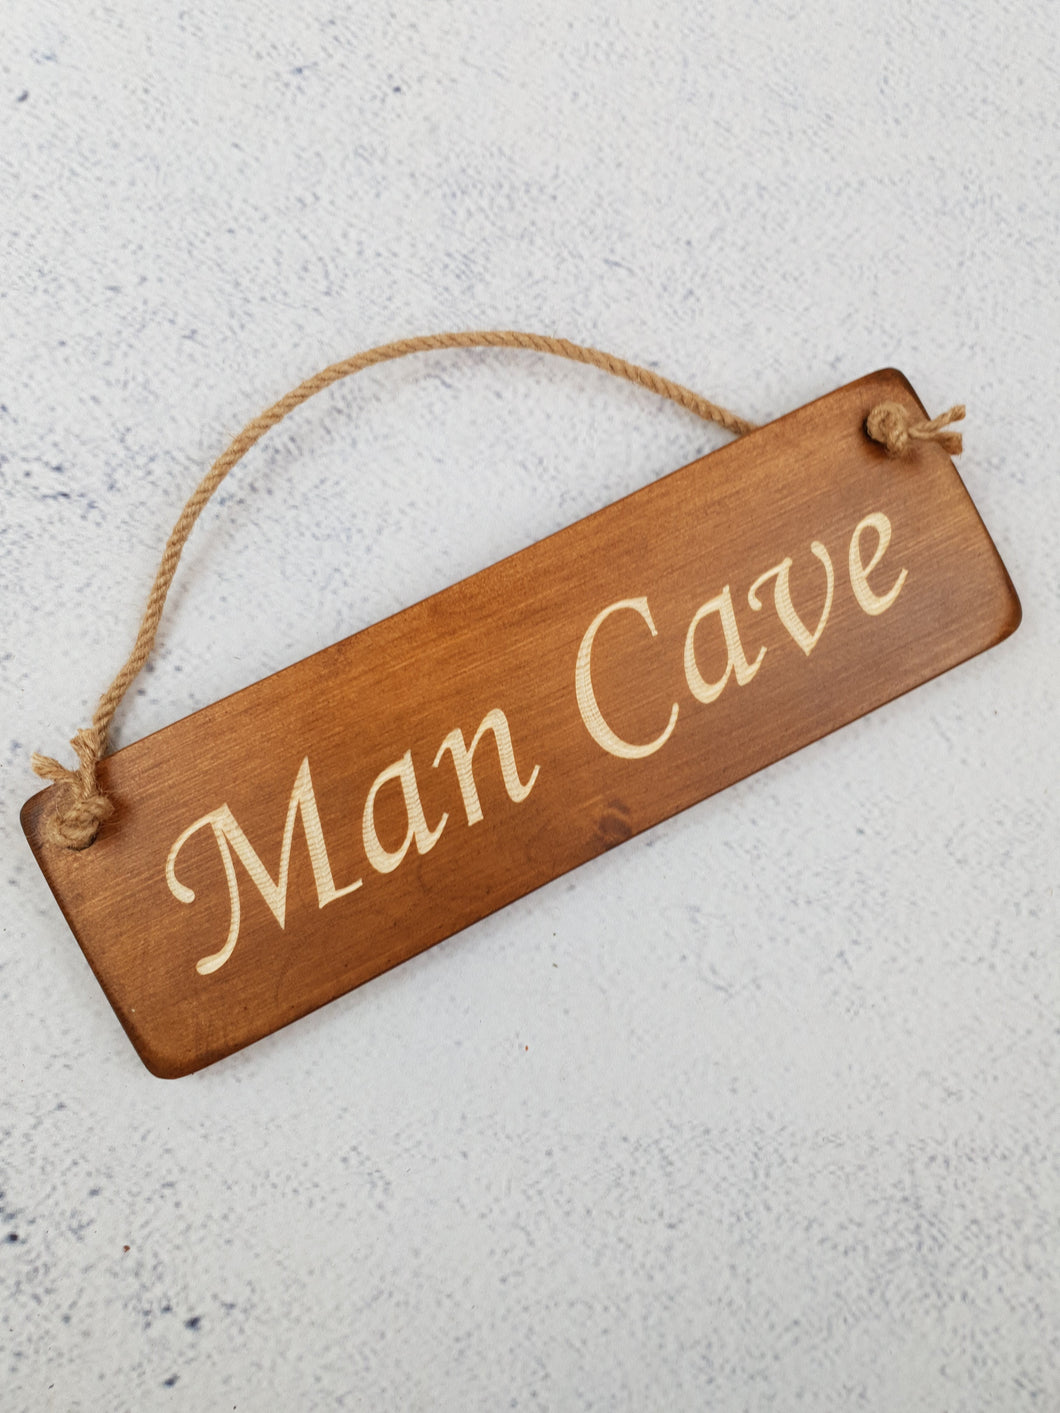 Personalised Gifts For Him - Hanging Sign - Man Cave